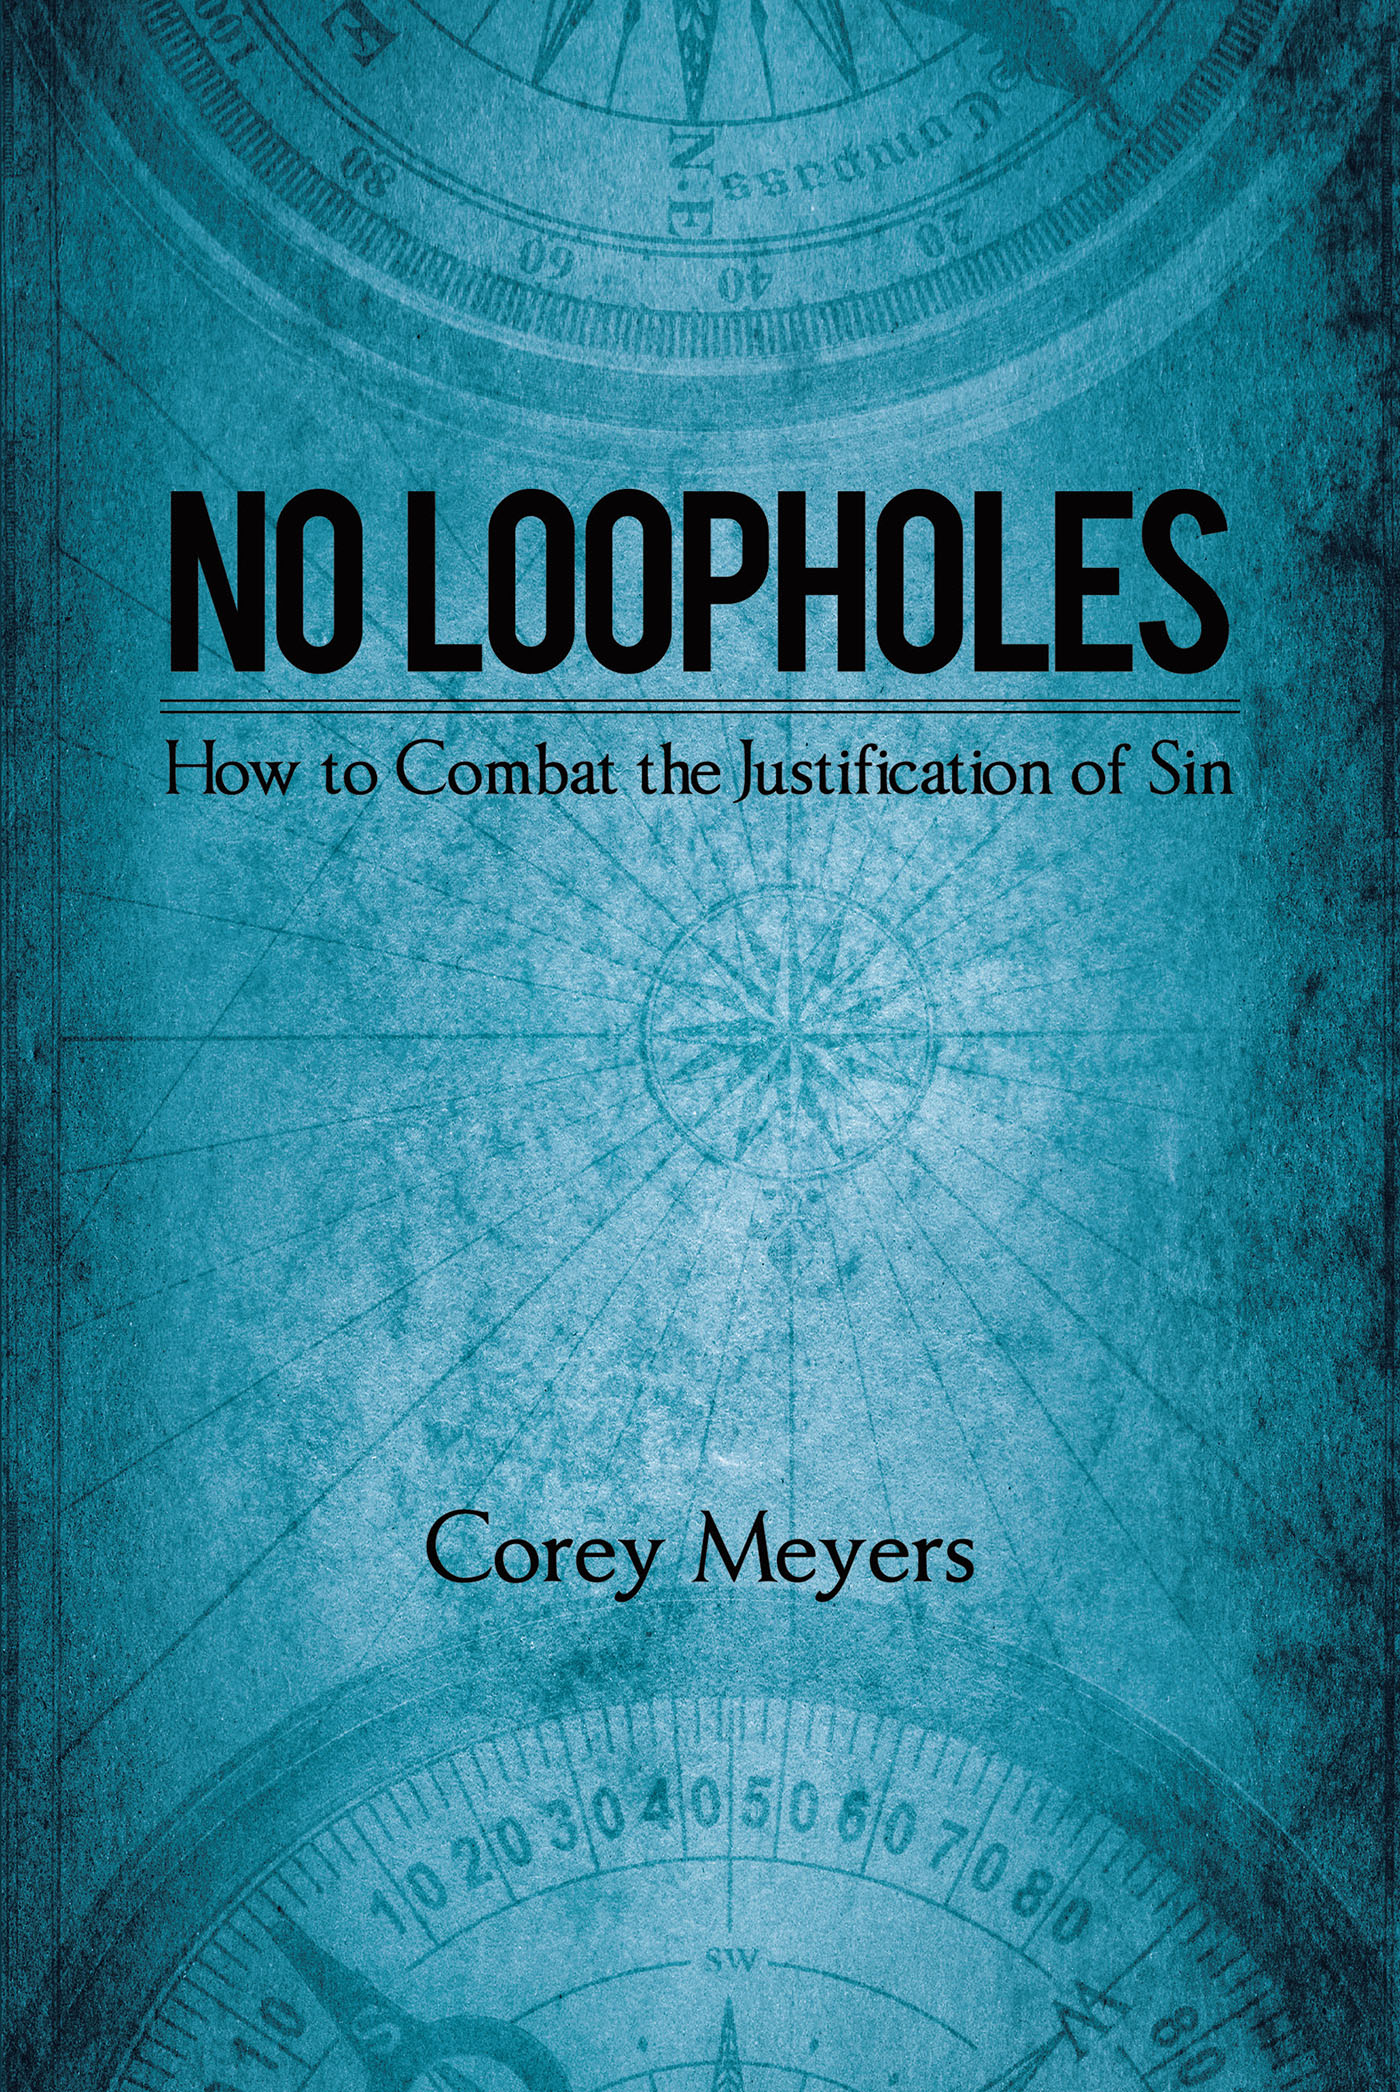 Corey Meyers’s Newly Released "No Loopholes: How to Combat the Justification of Sin" is a Concise Discussion That Presents Truths and Encouraging Guidance